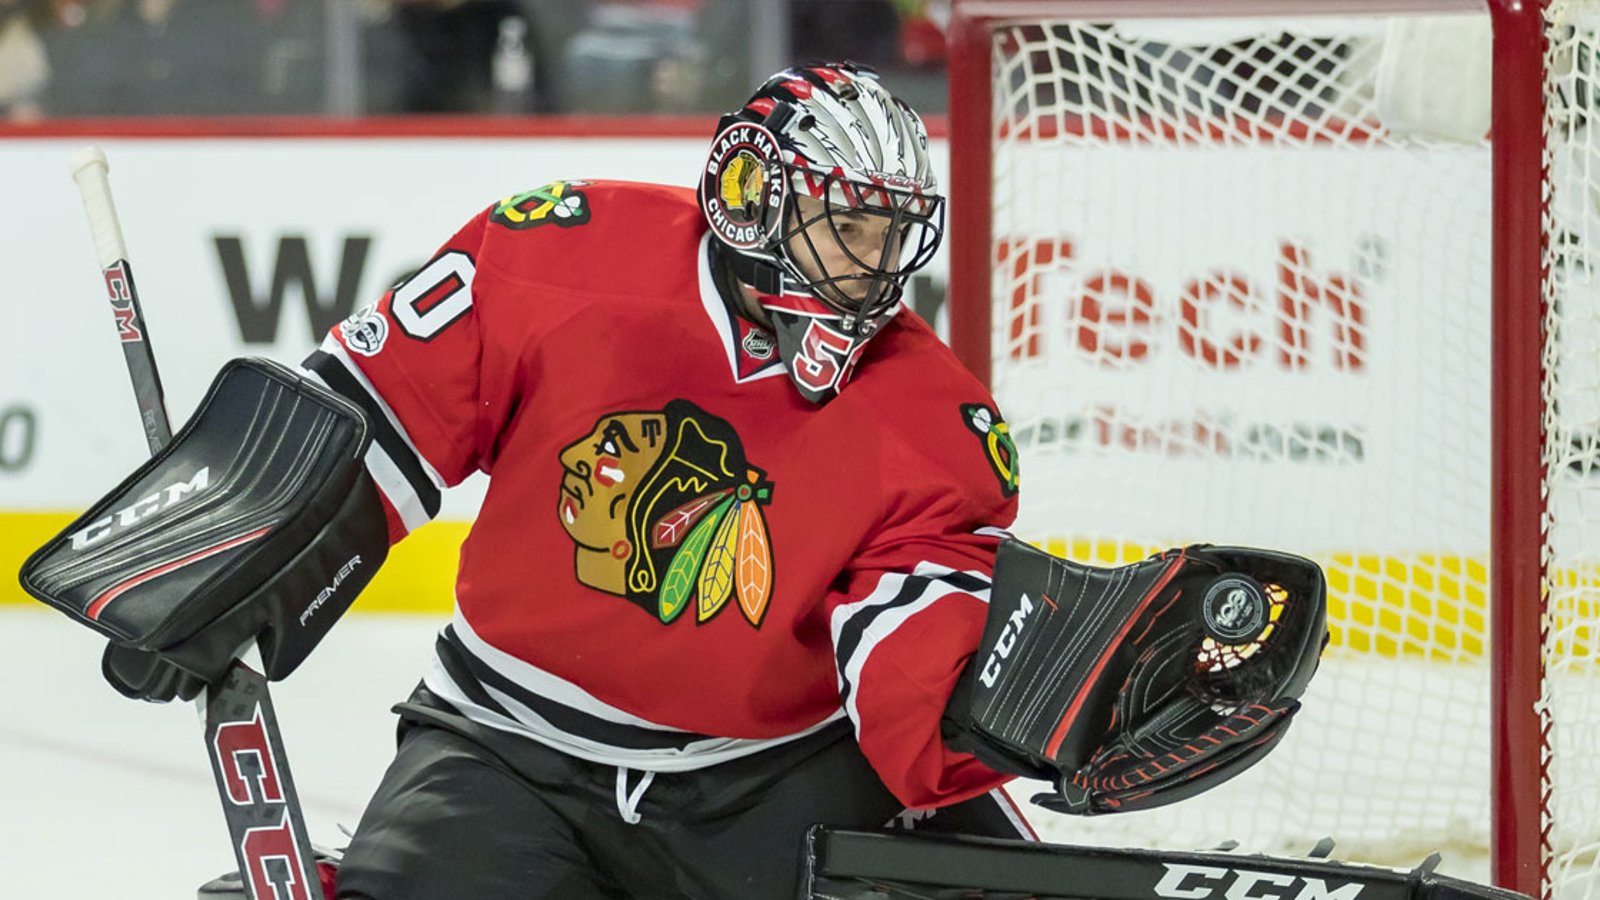 Breaking: Great news for Crawford and the Hawks! 